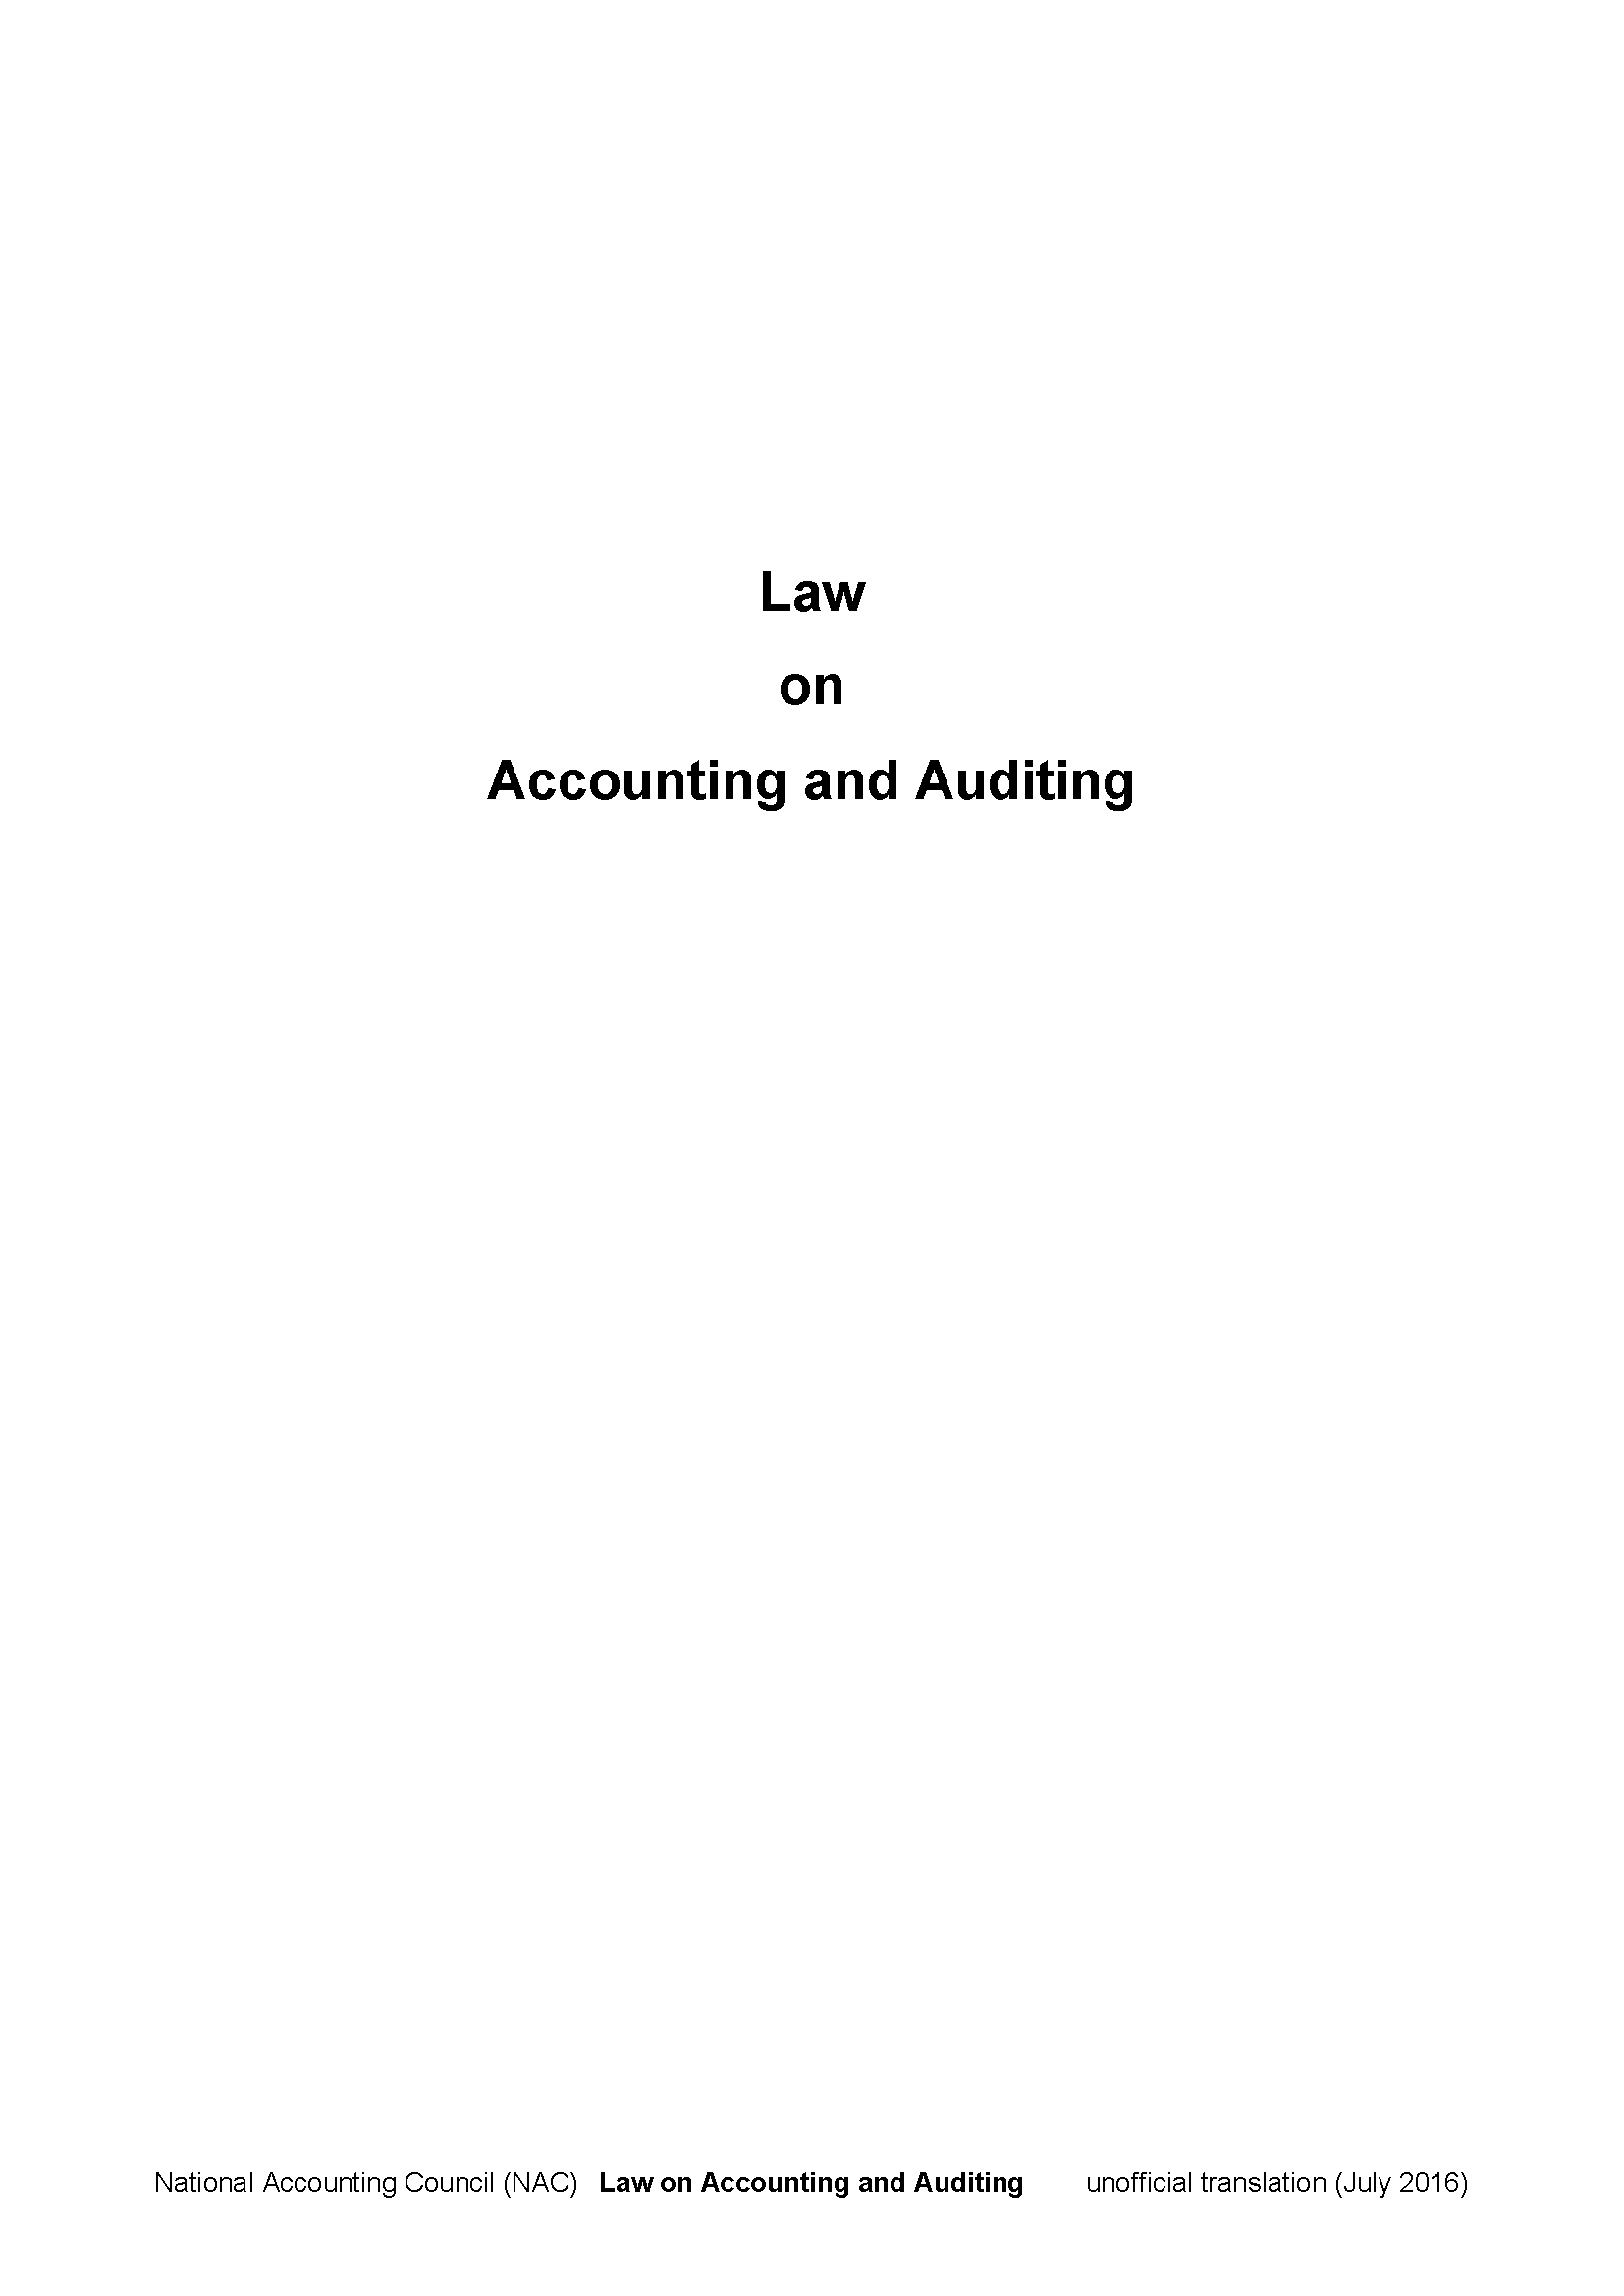 Law on Accounting and Auditing (Engish)